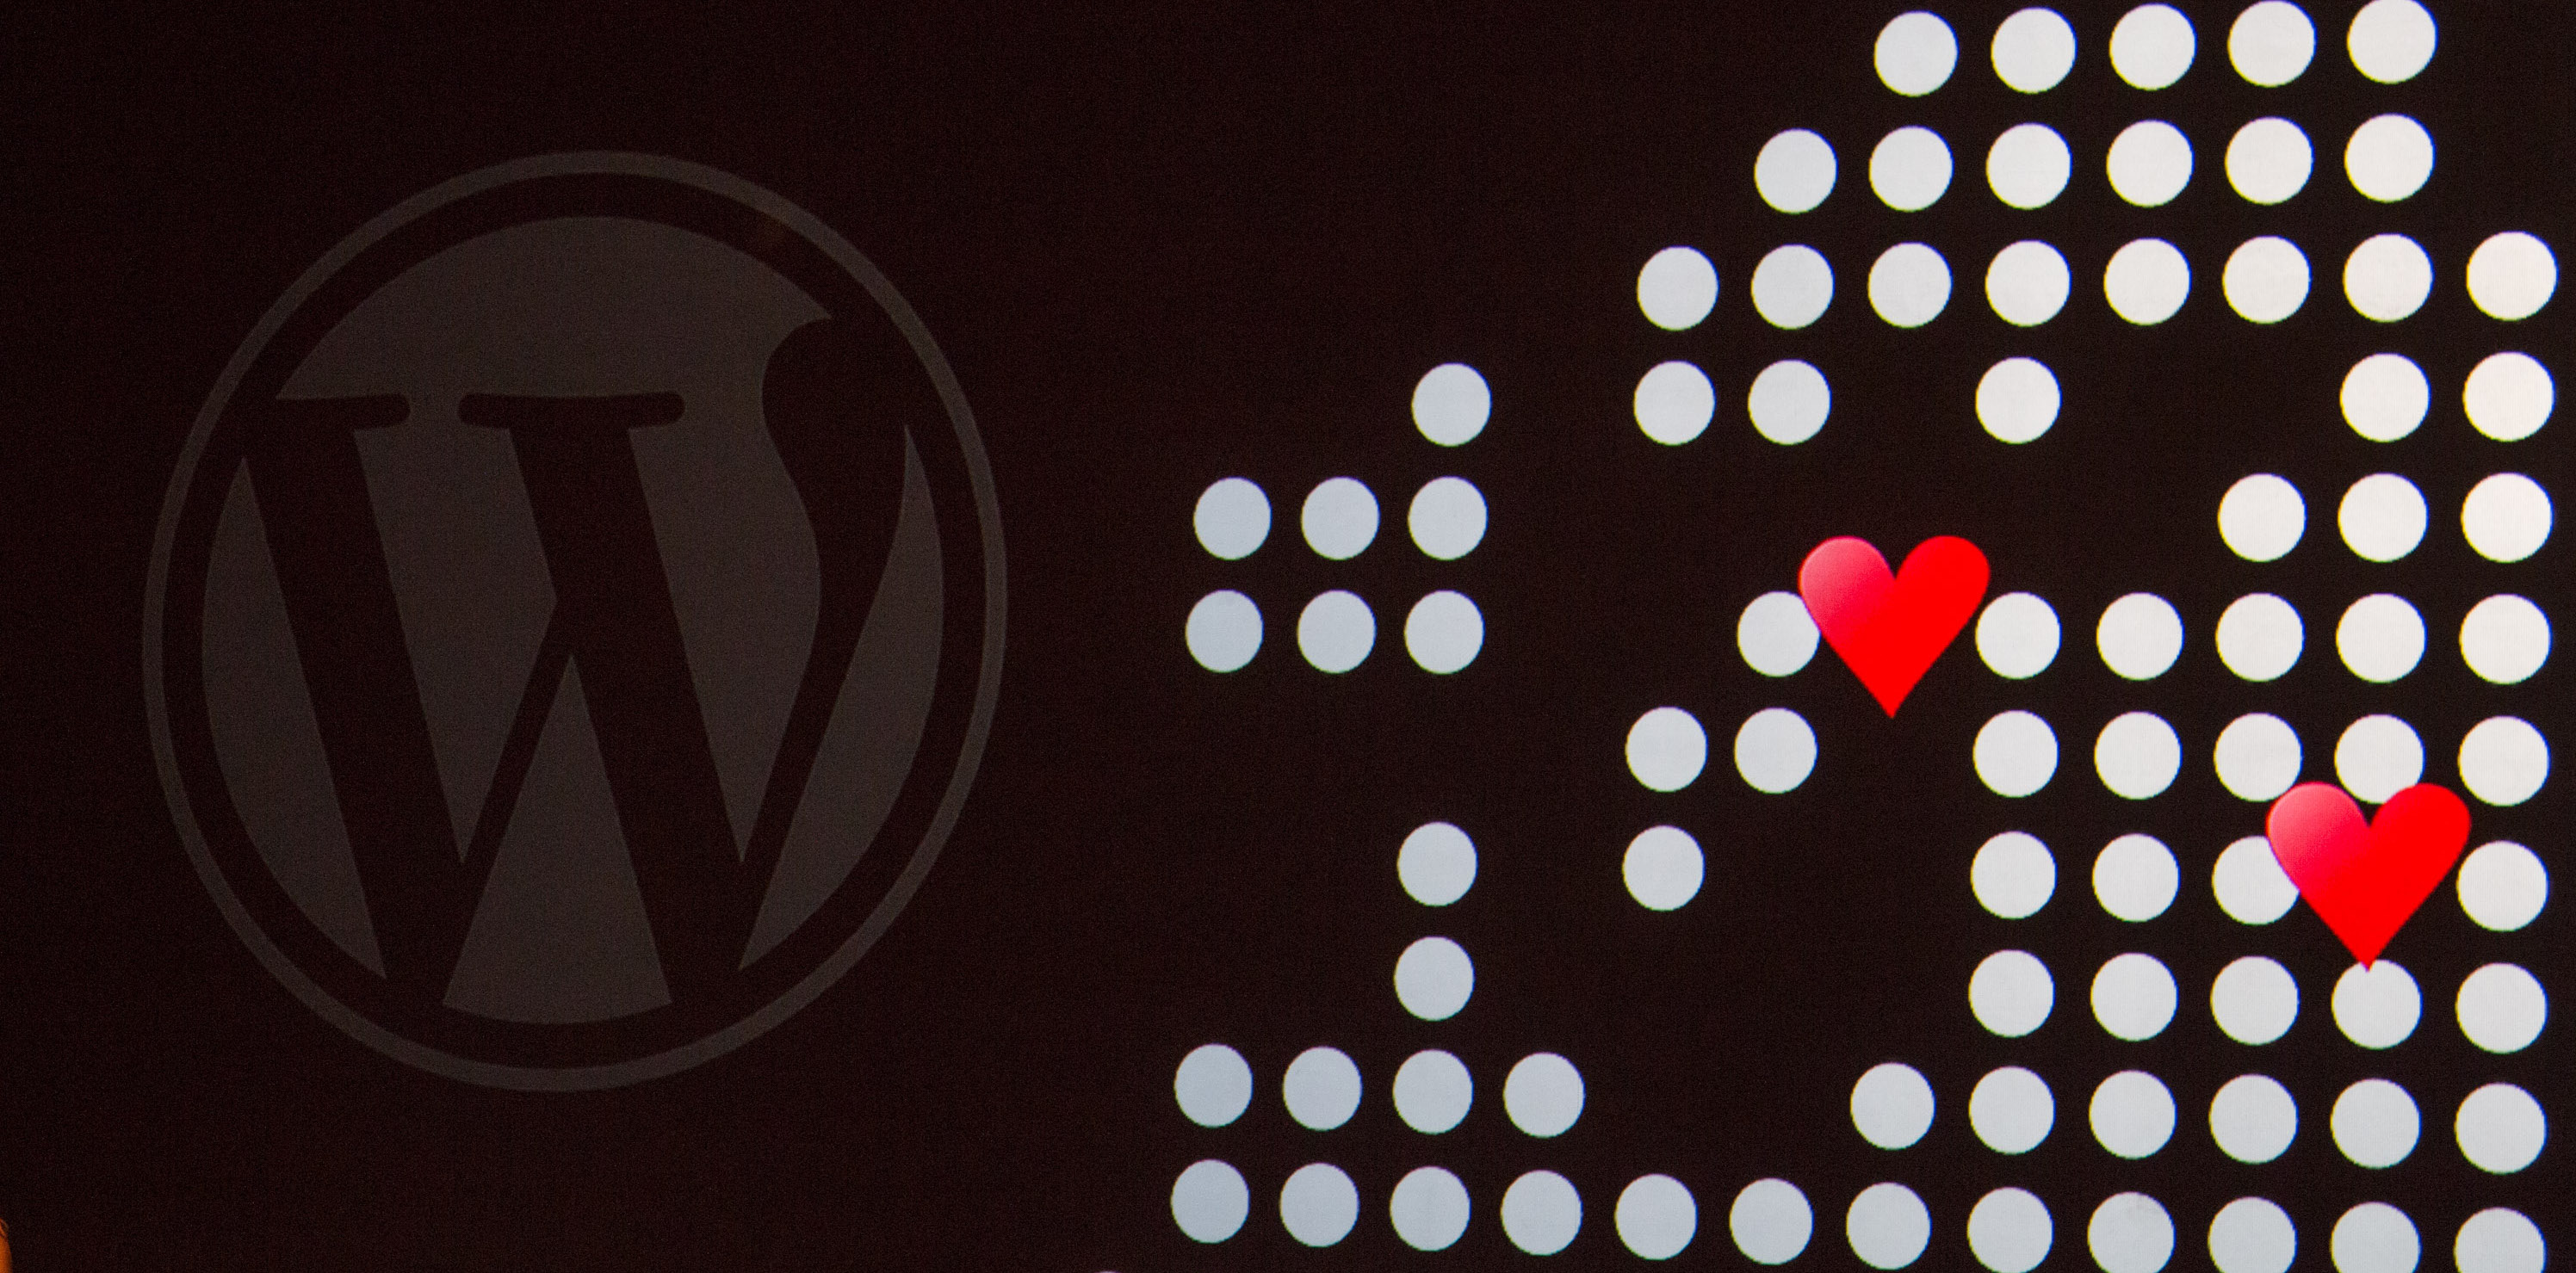 WordPress Podcast and Video Picks for the Week of May 22